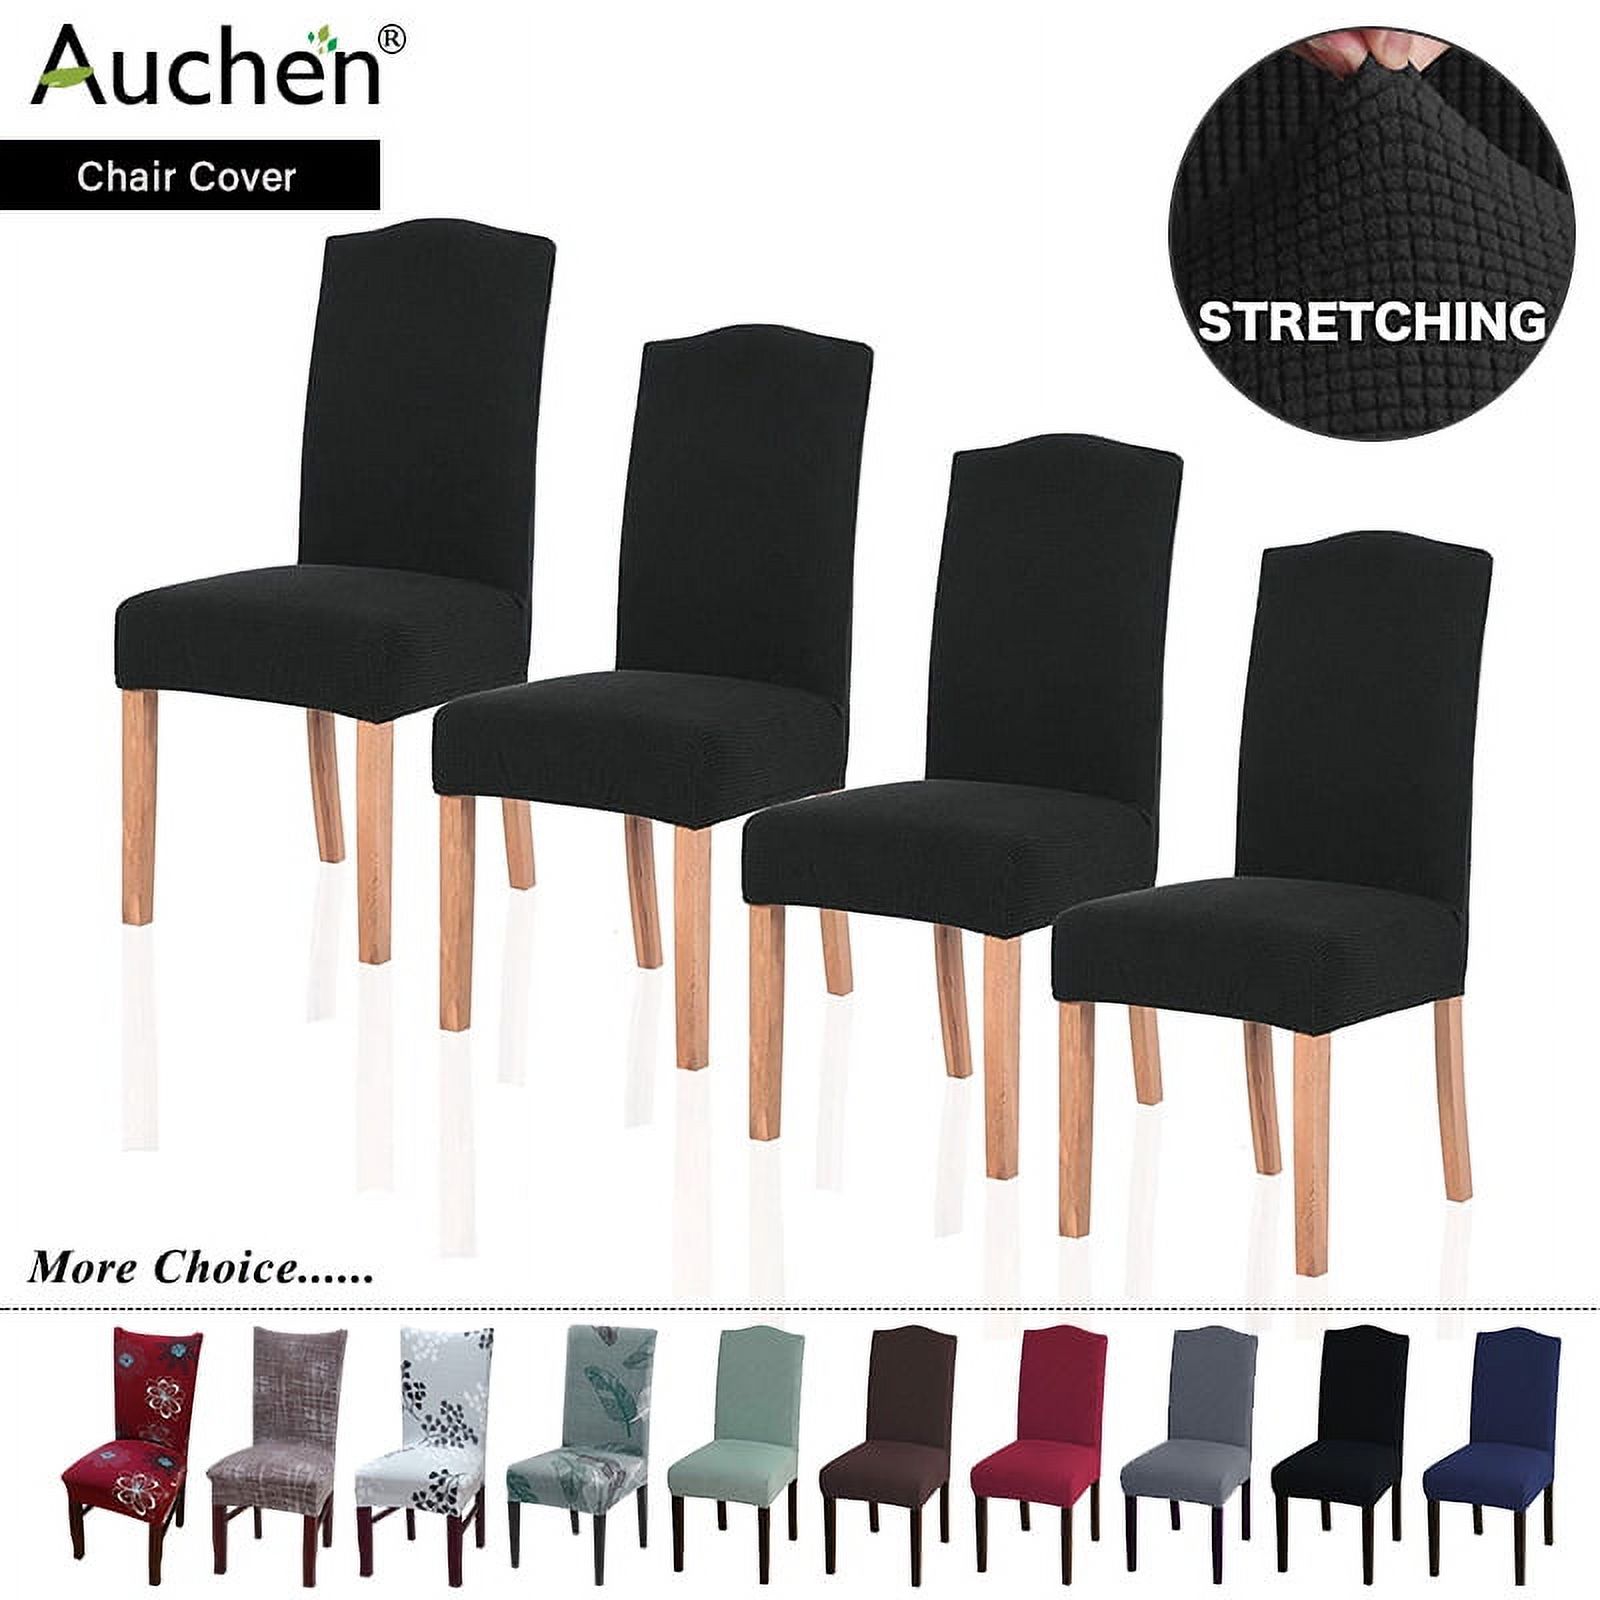 Chair Slipcover, AUCHEN Super Stretchy Dining Chair Covers Set of 4, Parsons Chair Protector Covers Chair Covers for Dining Room, Furniture Protector Covers for Restaurant Hotel Ceremony (Black) - image 1 of 9